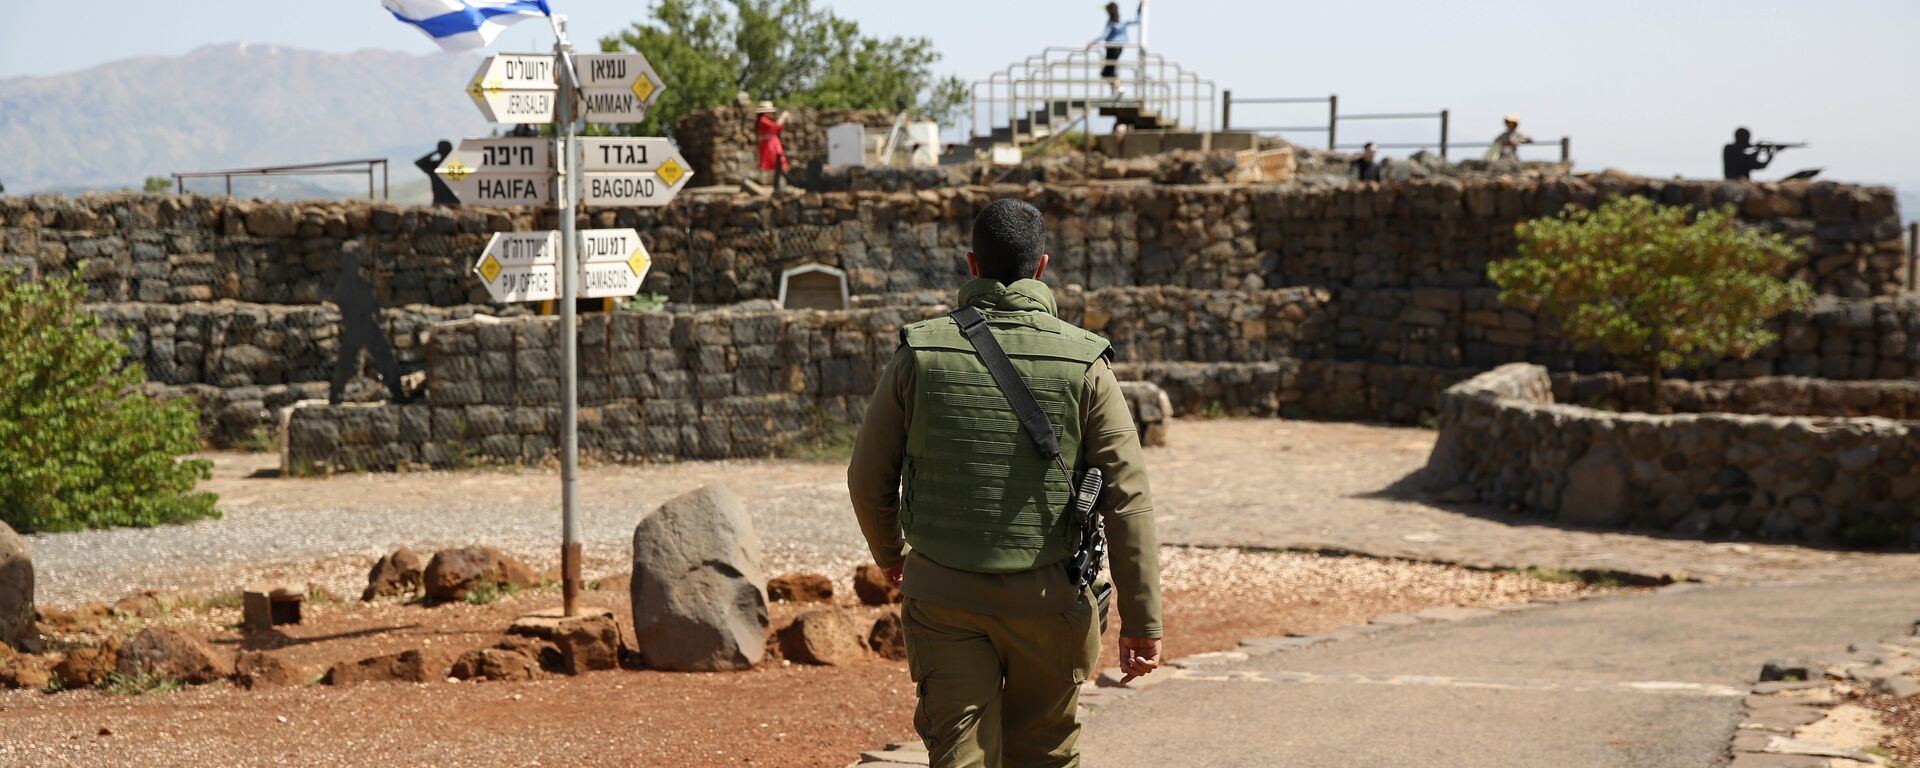 An Israeli soldier walks in an old military outpost, used for visitors to view the Israeli controlled Golan Heights, near the border with Syria, Thursday, May 10, 2018 - Sputnik International, 1920, 26.12.2021